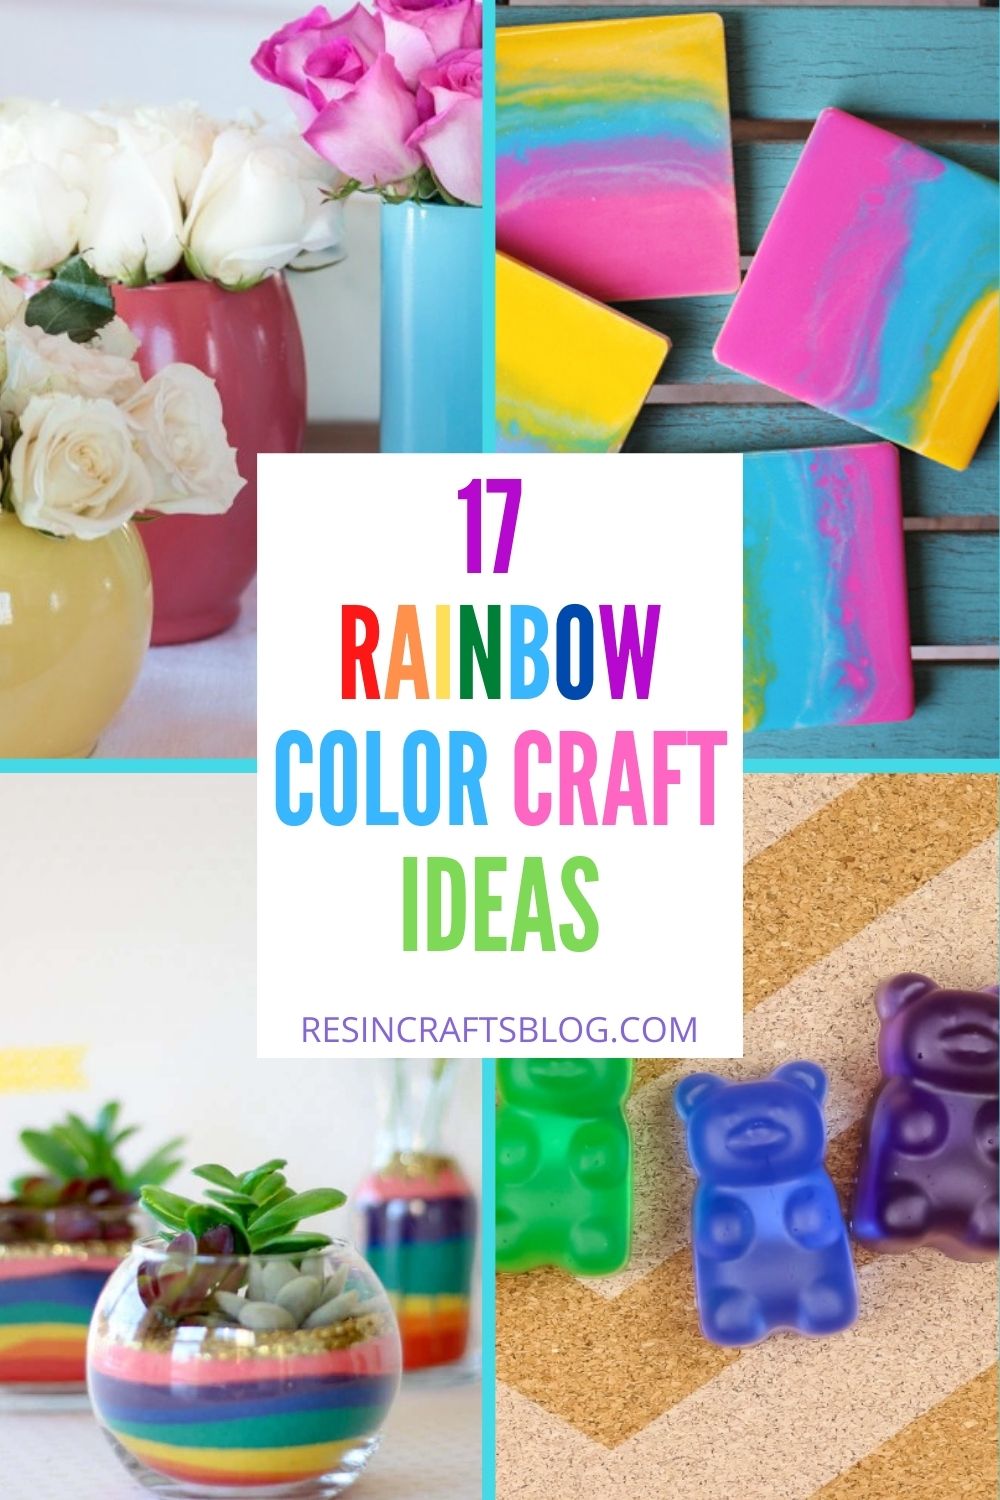 Add a little color to your home and garden with these fun DIY rainbow crafts. There are simple coasters, wall art, garden stones and more! #resincraftsblog #diyrainbowcrafts #colorfulcrafts via @resincraftsblog